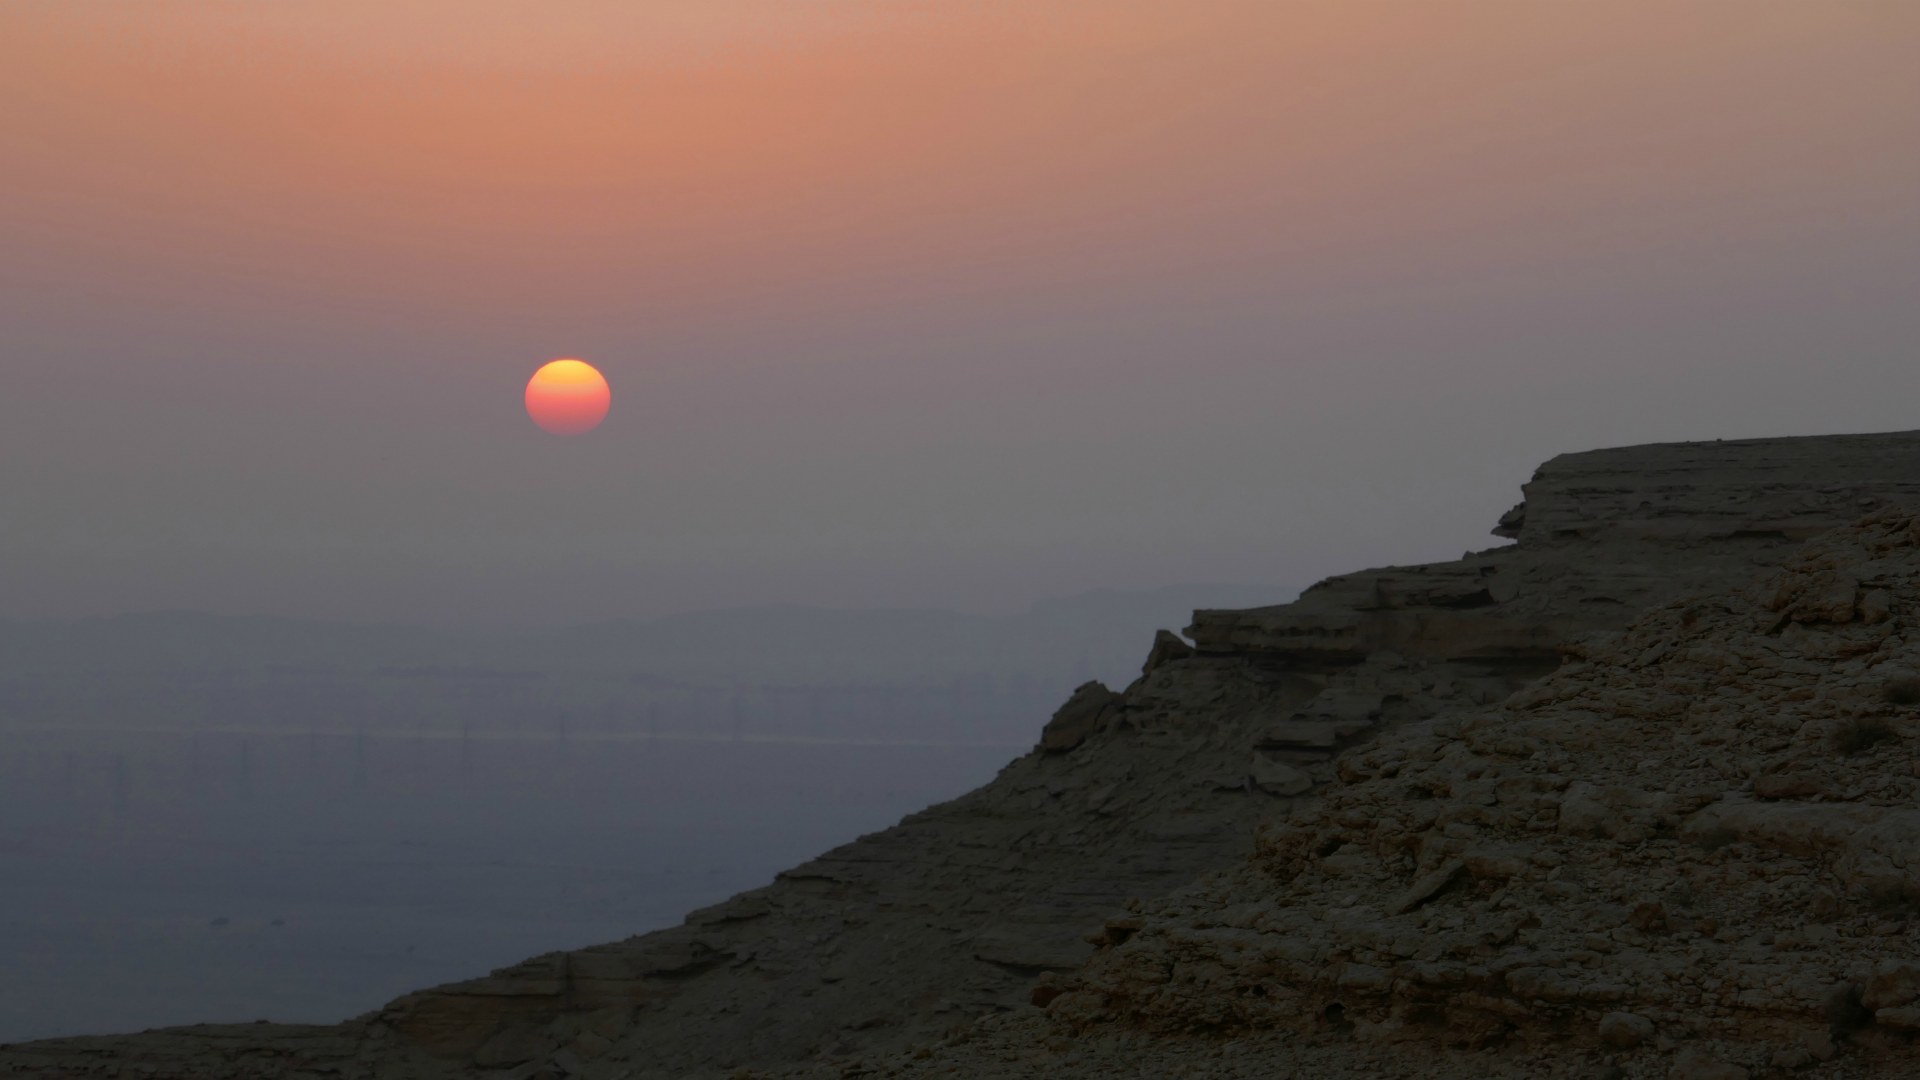 Sunset at The Edge of the World west of Riyadh